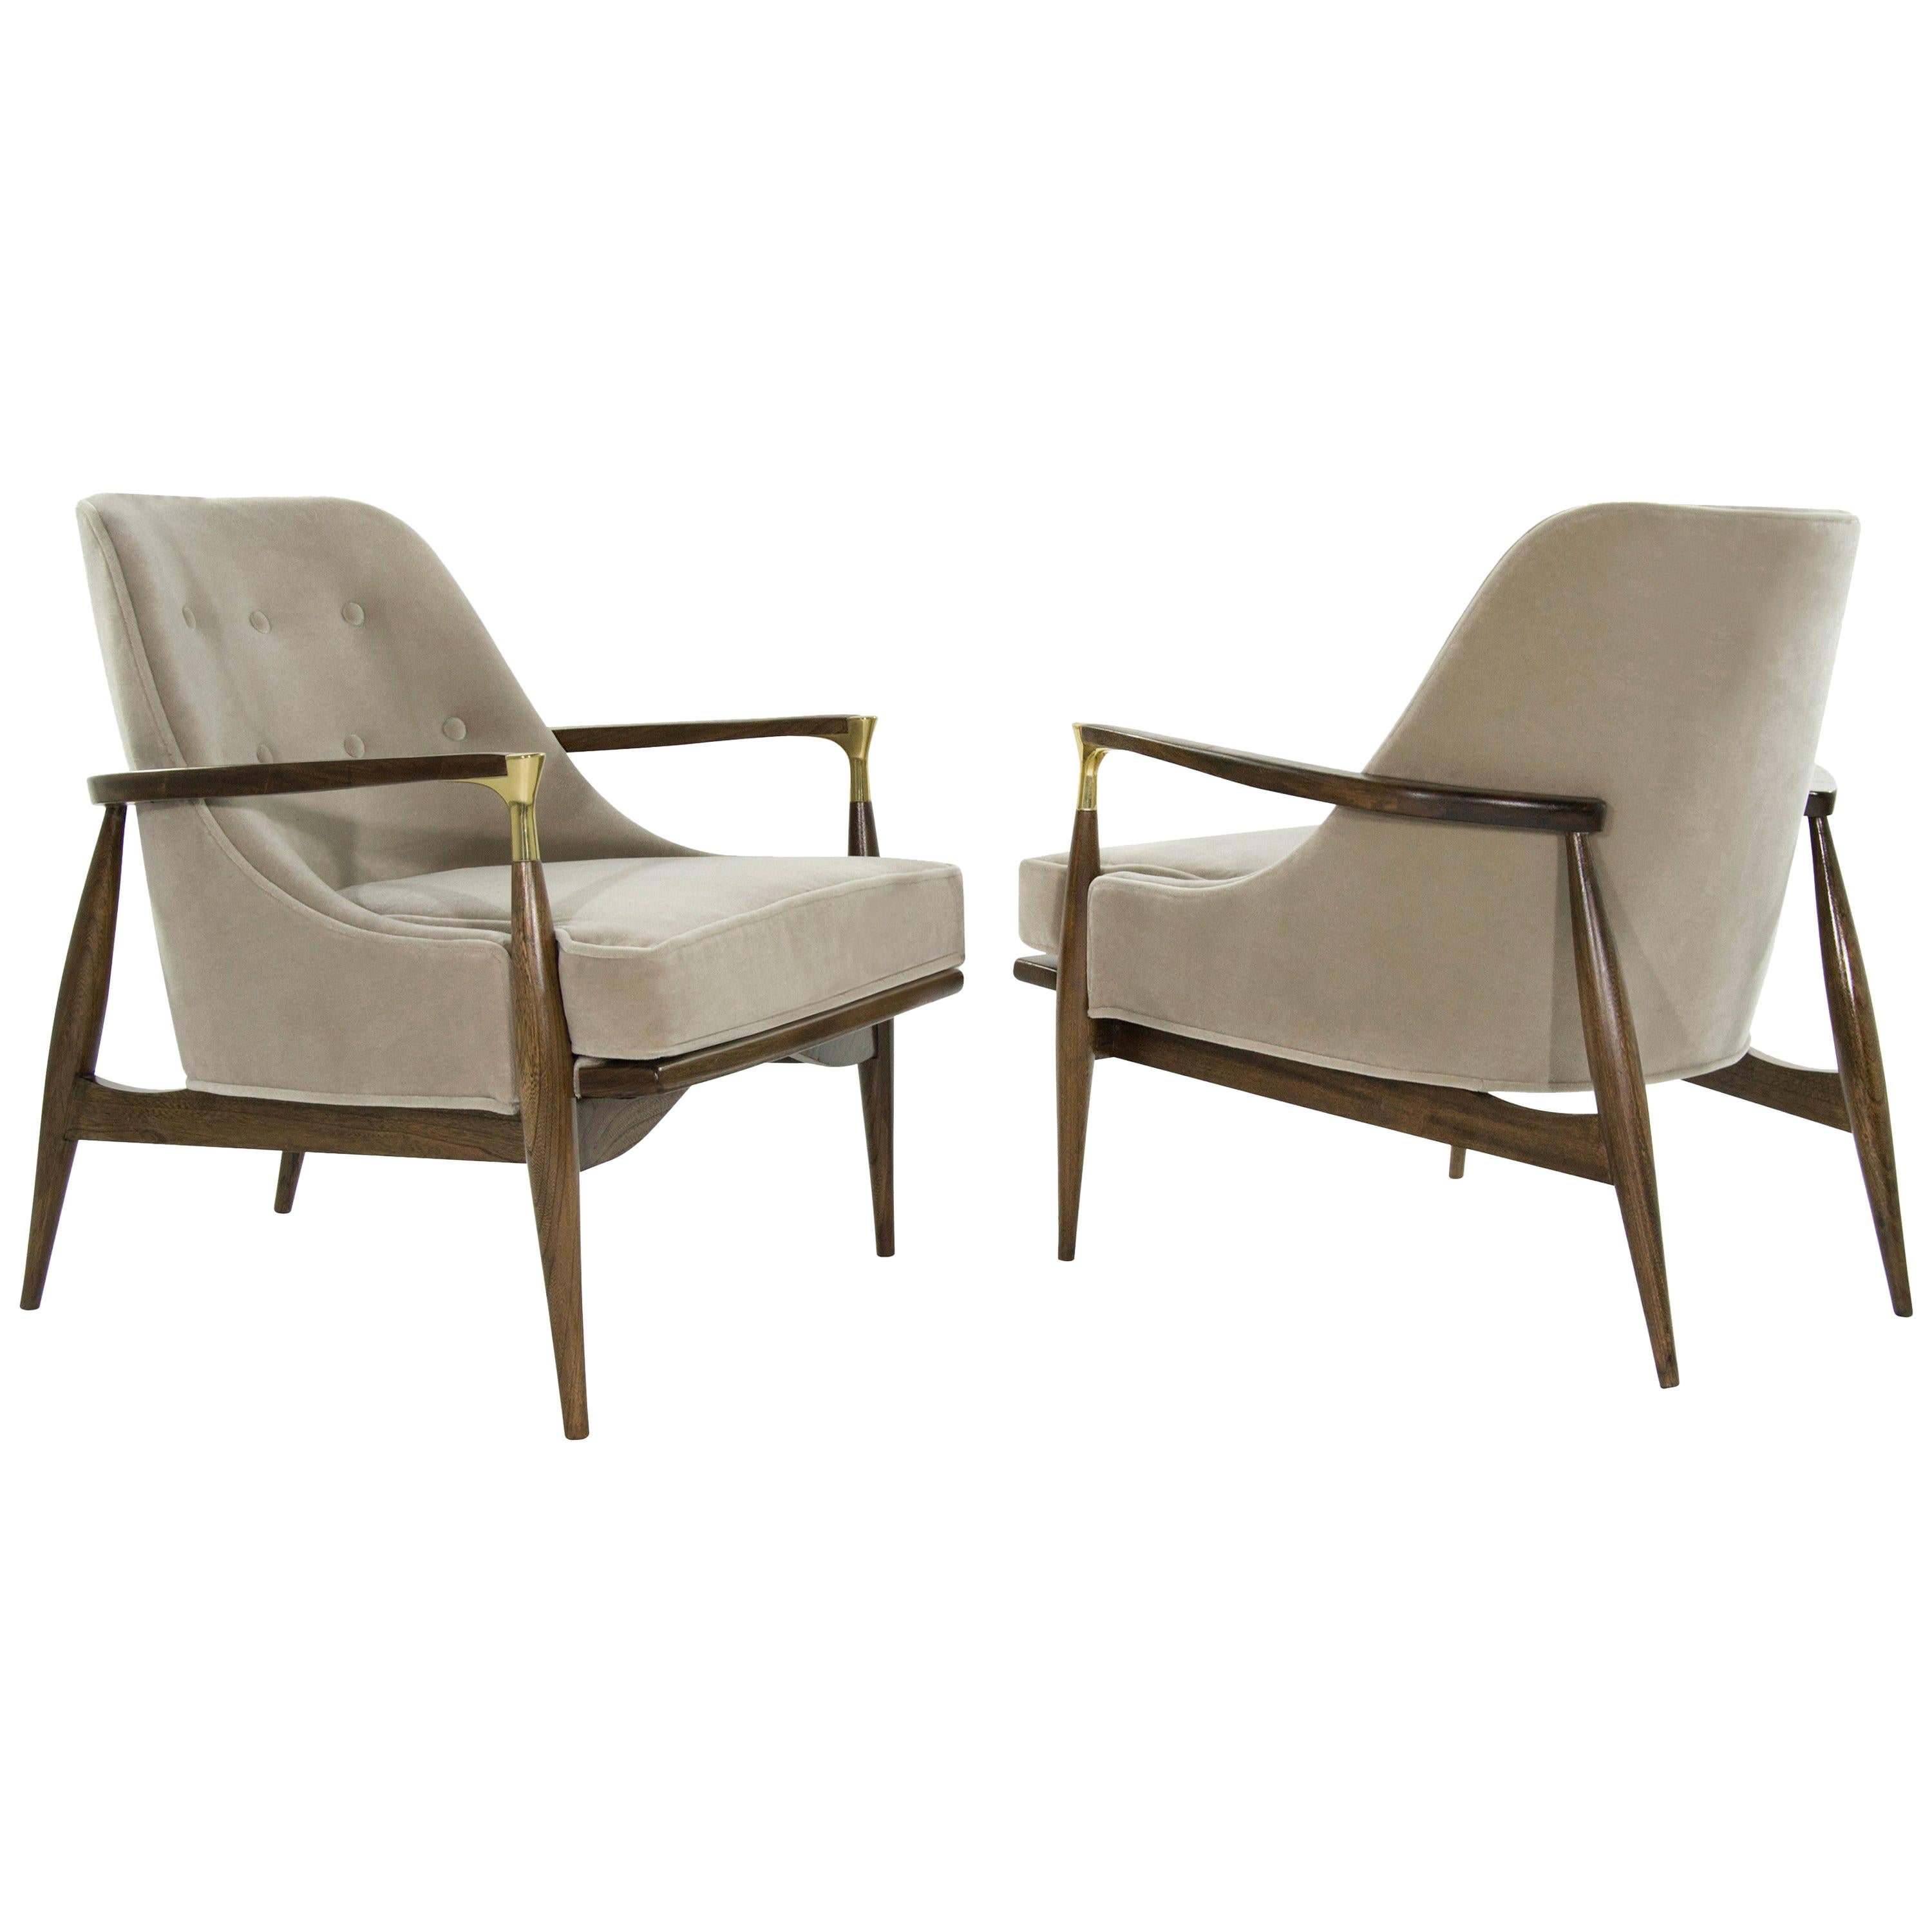 Pair of Modern Brass Accented Walnut Lounge Chairs, 1950s